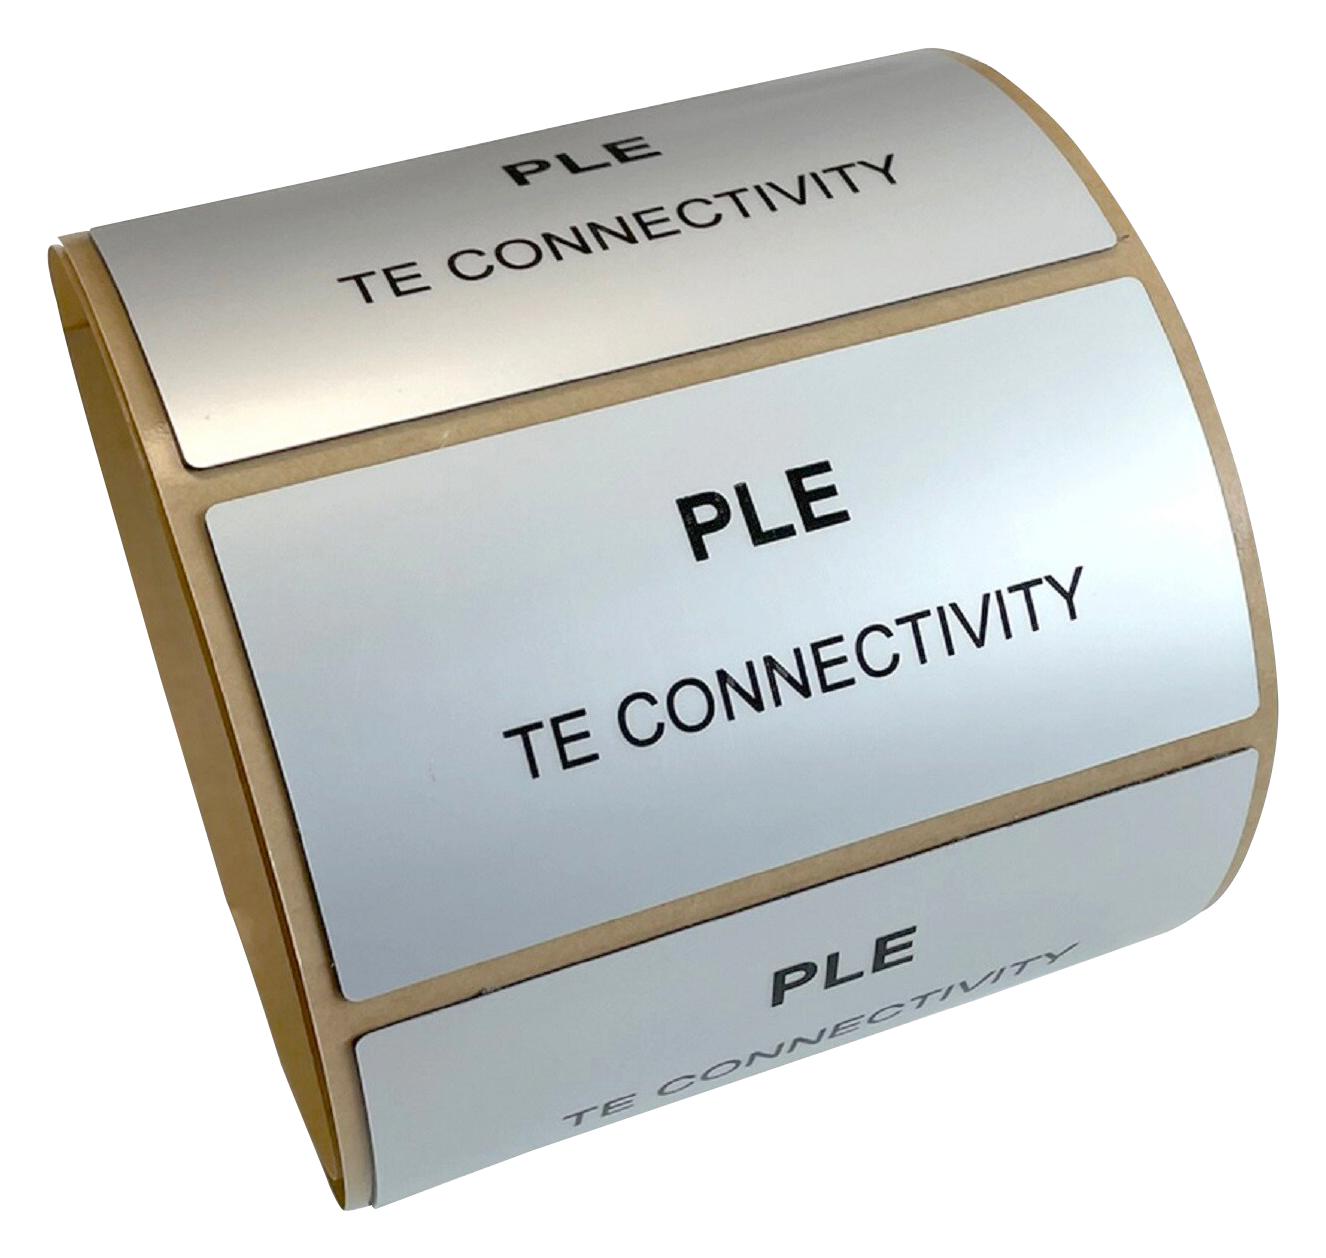 Entrelec TE Connectivity Ple-027018-Gy-0.625 Label, Polyester, Grey, 27mm X 18mm